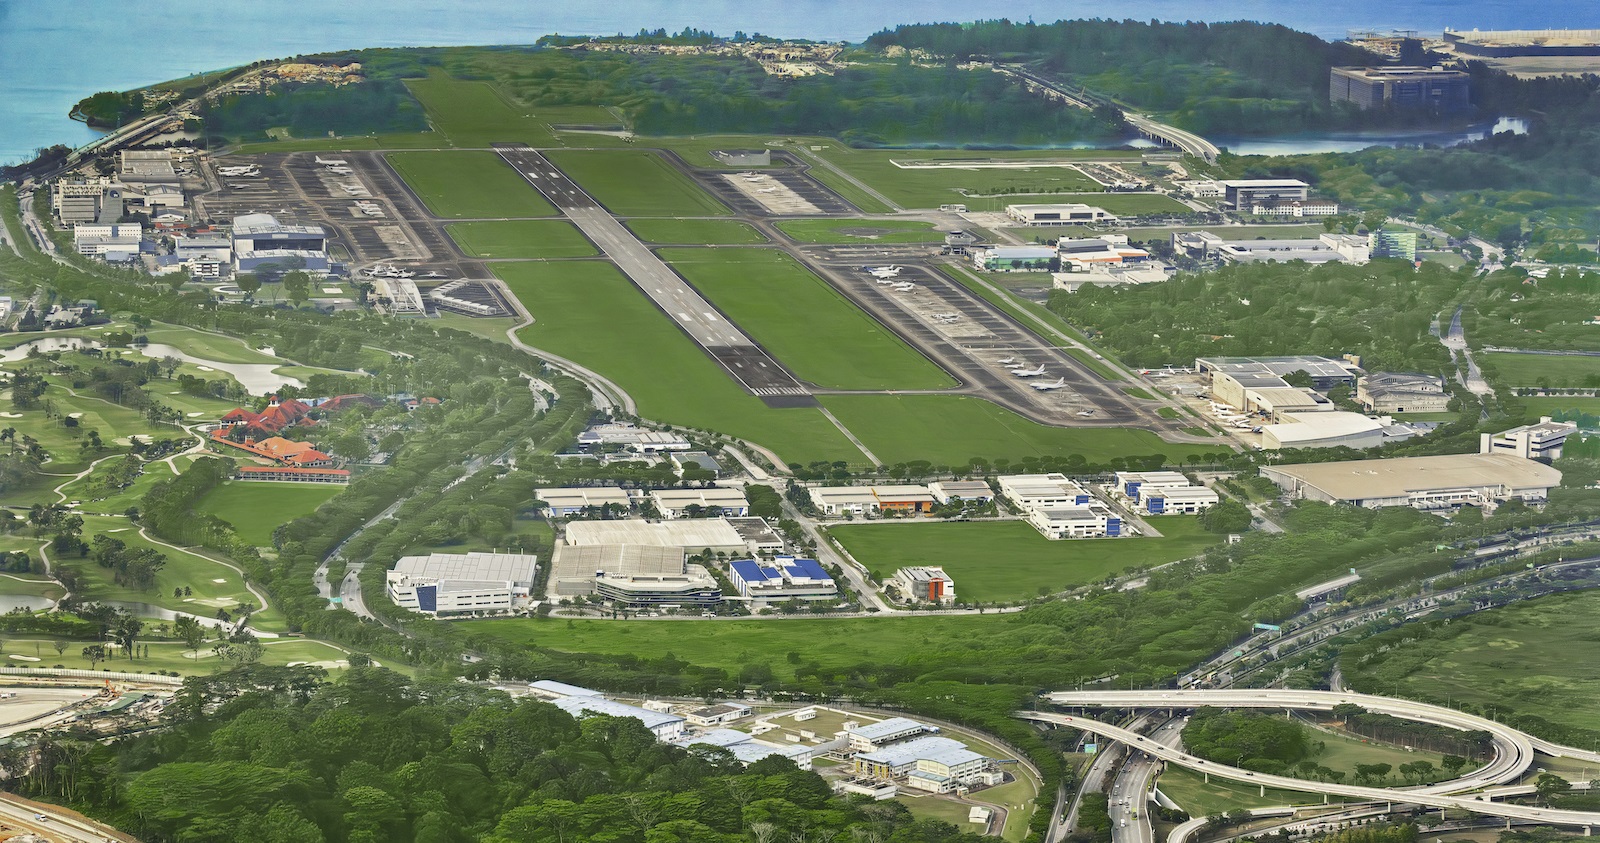 The 320-hectare Seletar Aerospace Park is home to many renowned aerospace companies, including Rolls-Royce